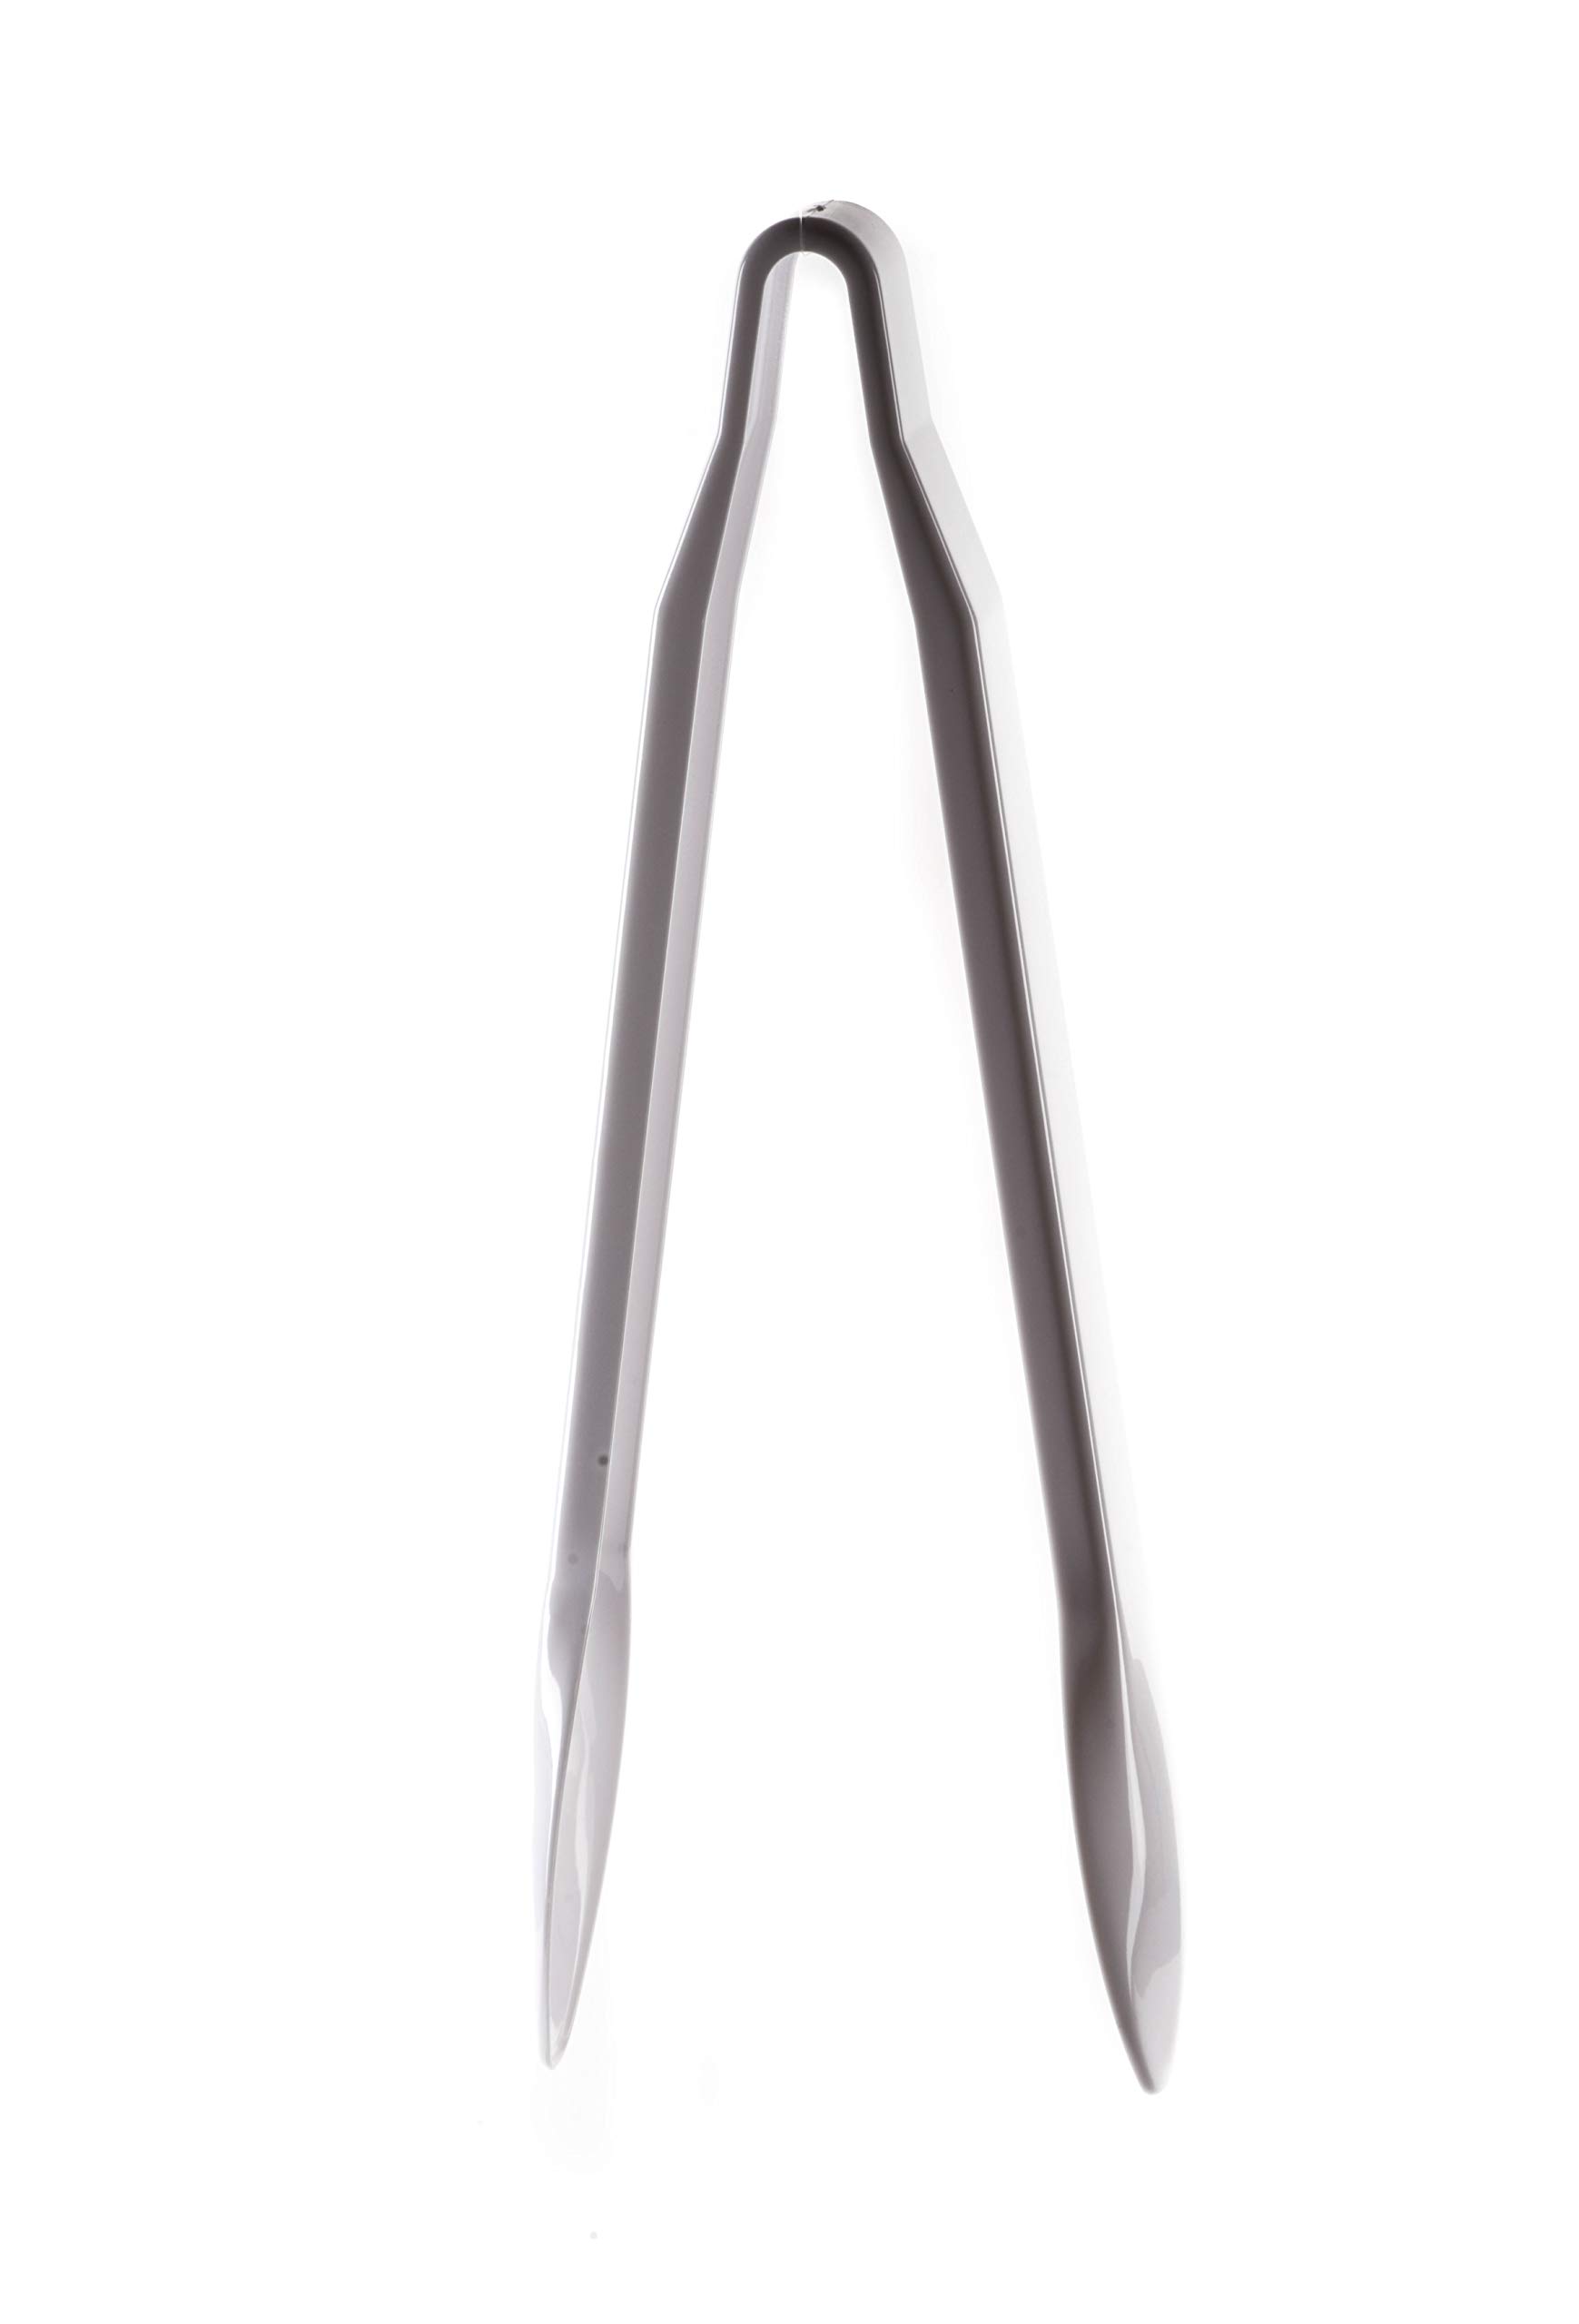 Set of 3 - Heavy Duty White Serving Tongs - 12 inch - Plastic Disposable Salad Tongs - High Heat Plastic, Catering, Salads, Bakery, Buffets, BBQ, Ice, Hot and Cold Foods (12")